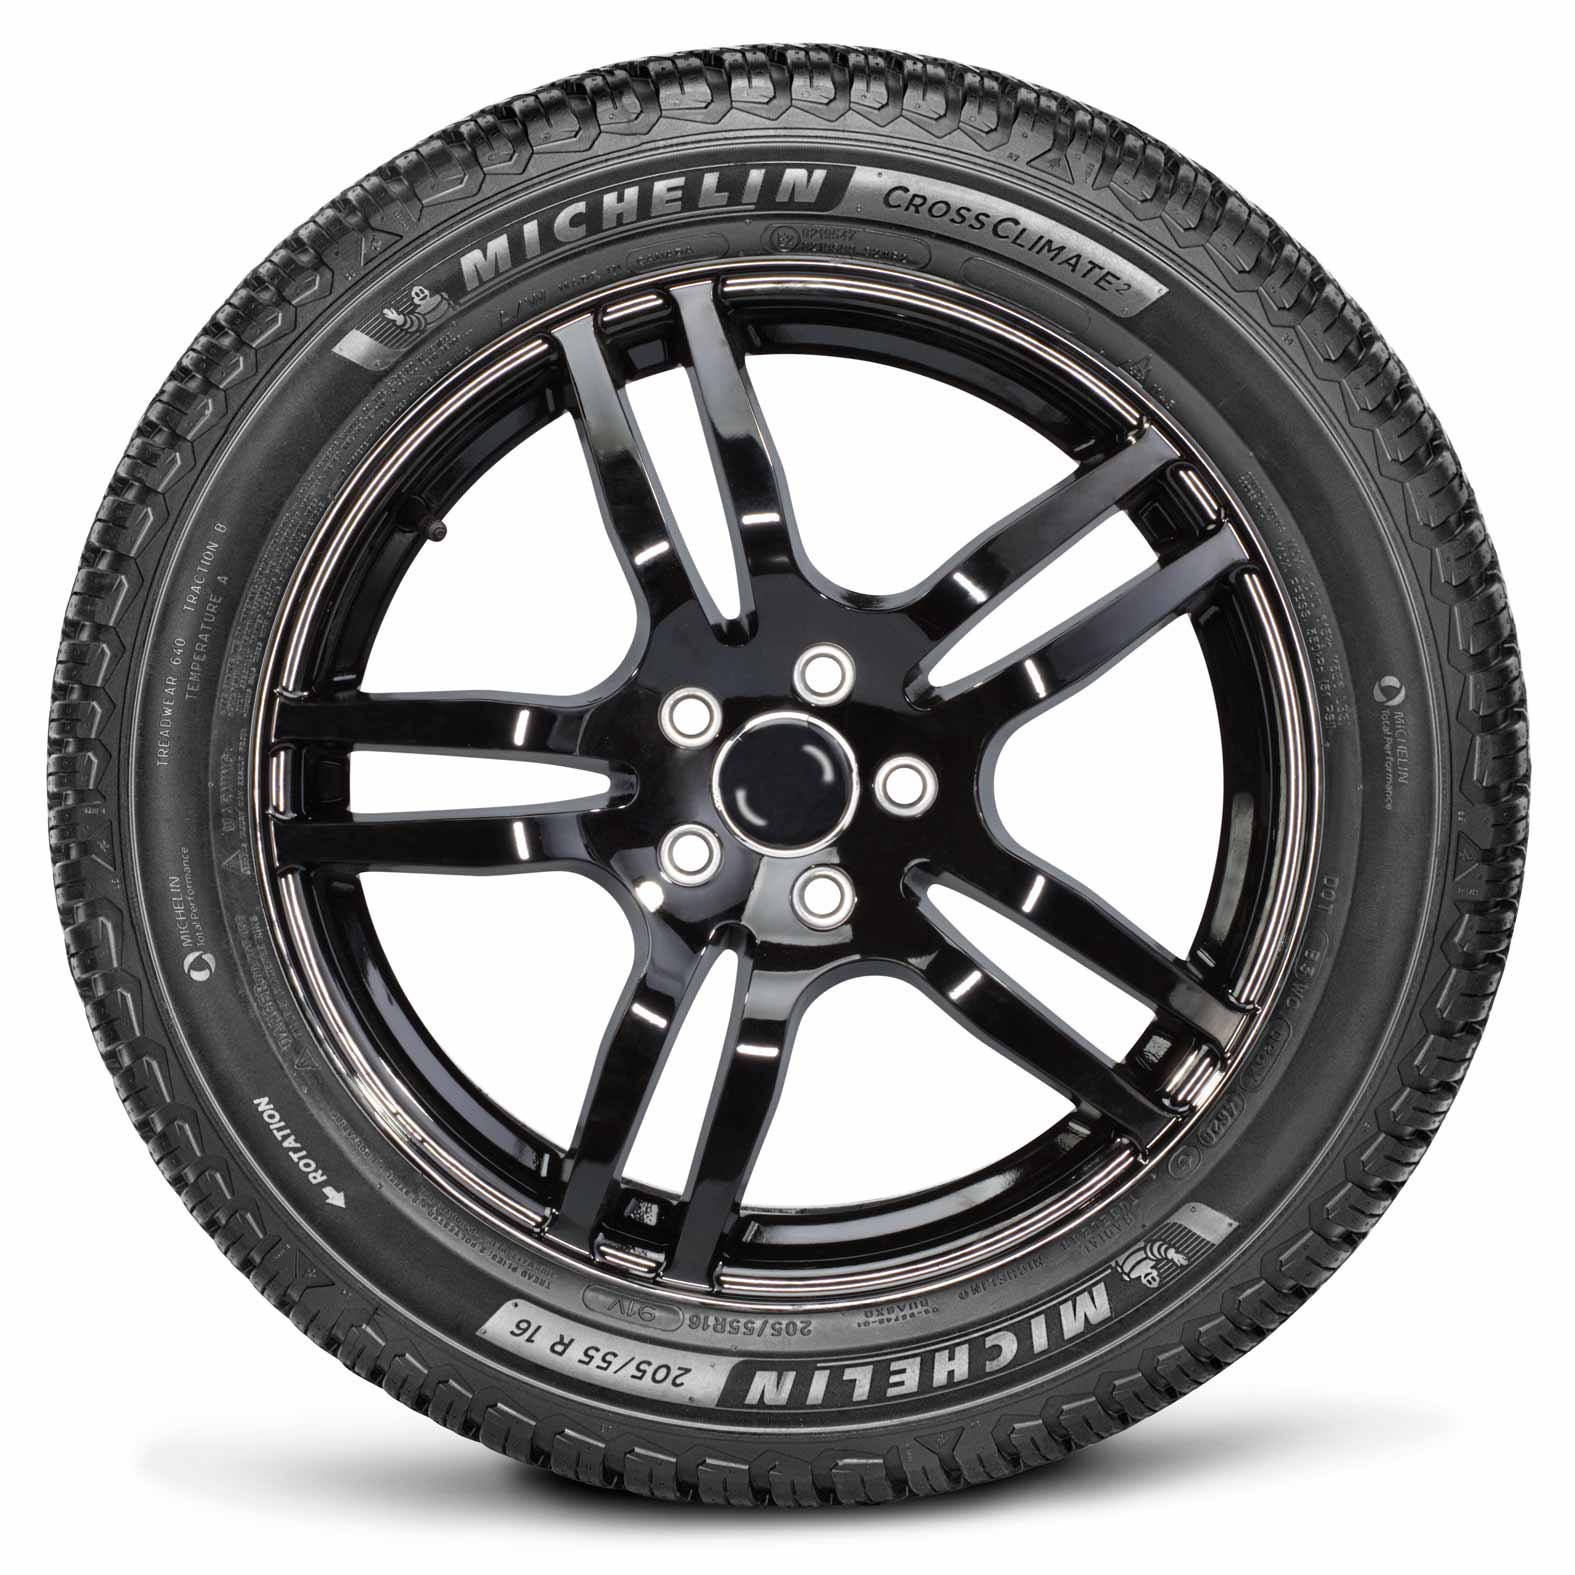 Michelin for Tire All-Weather Kal | Tires CrossClimate 2